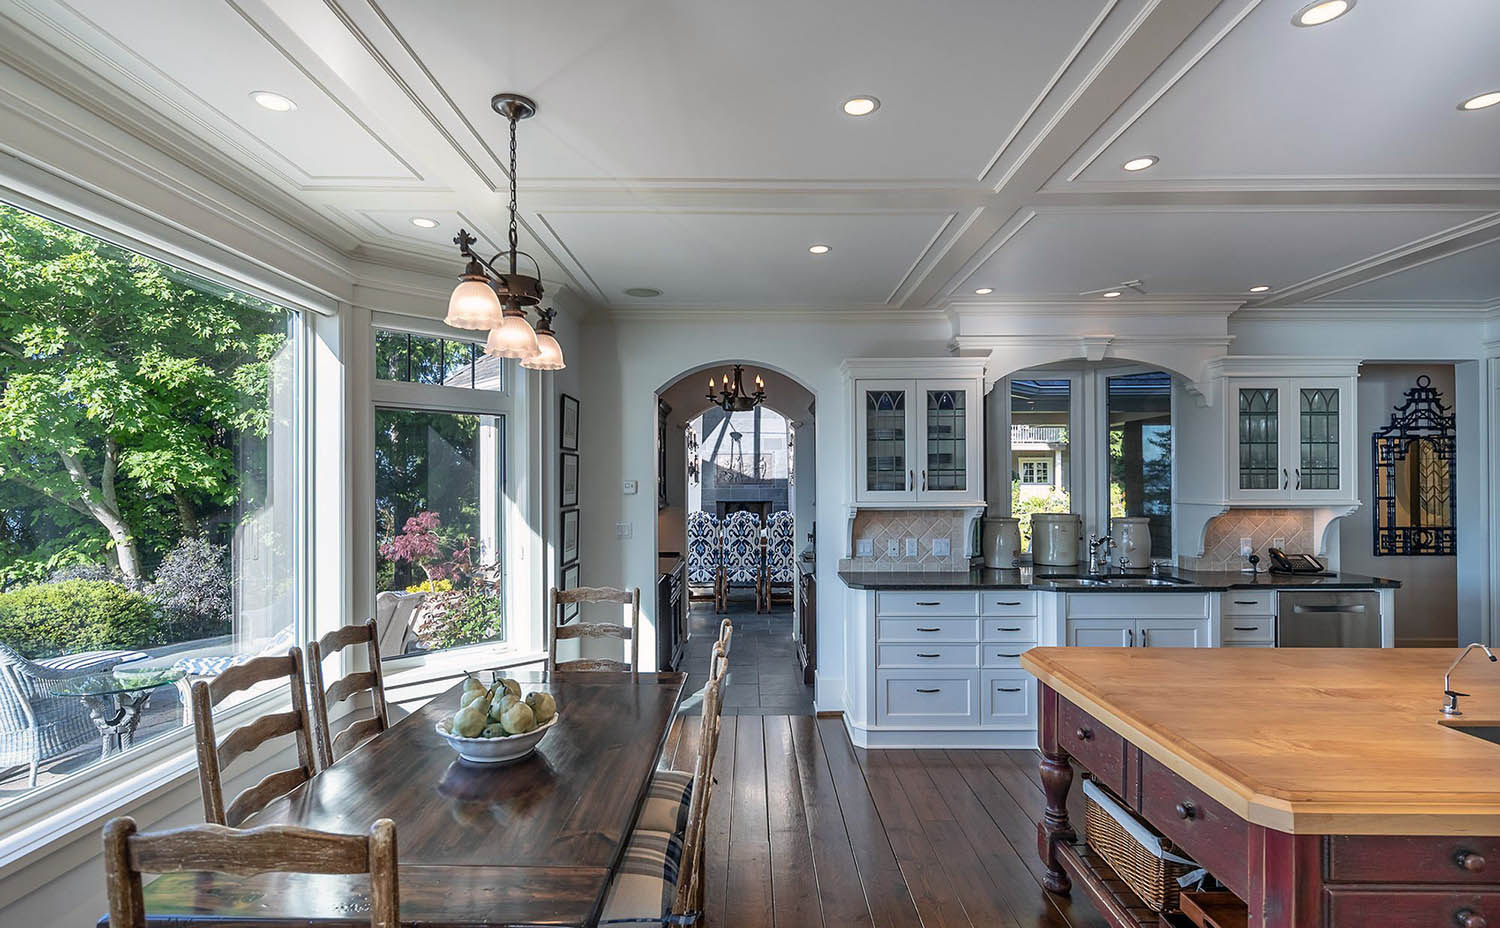 Low profile coffered ceiling in an open floor plan kitchen, dining and living room.